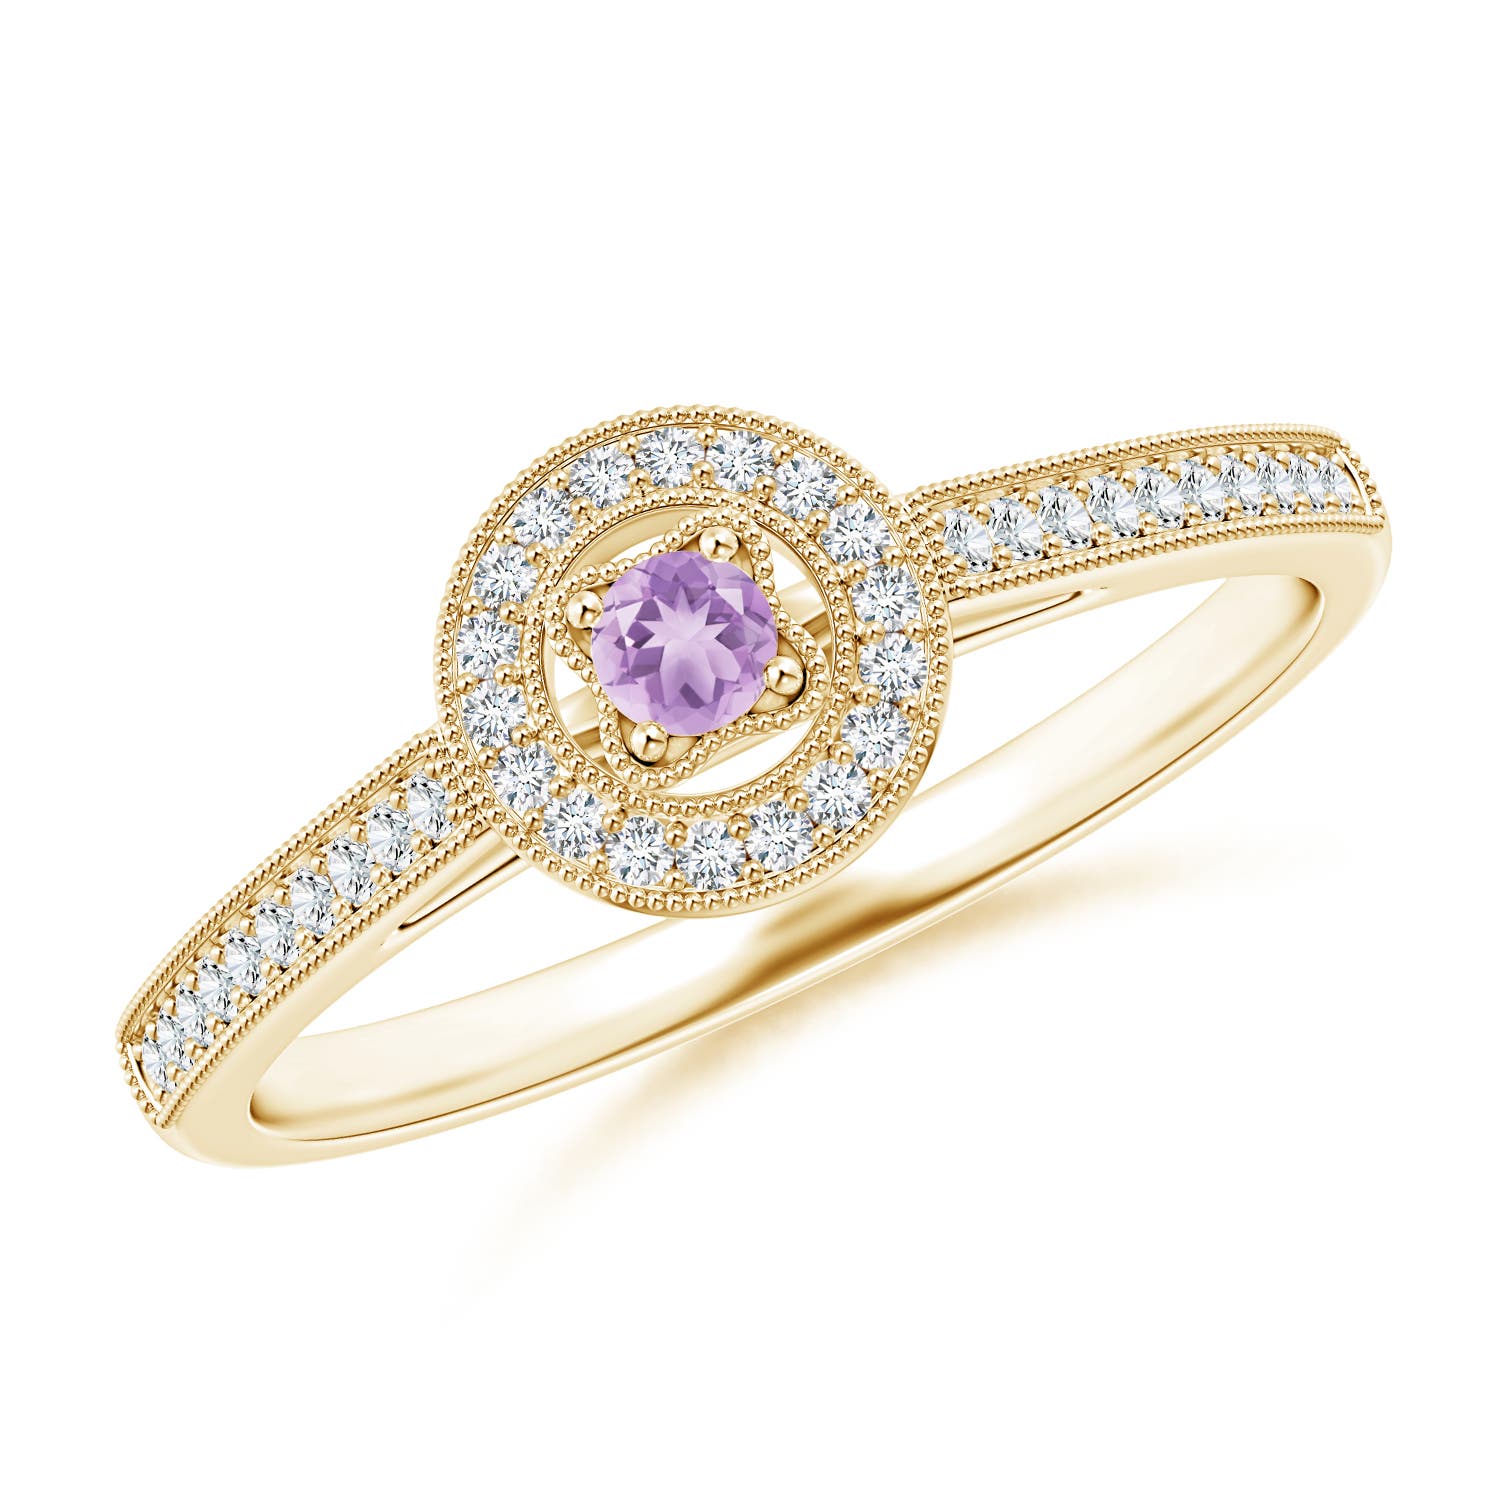 A - Amethyst / 0.19 CT / 14 KT Yellow Gold